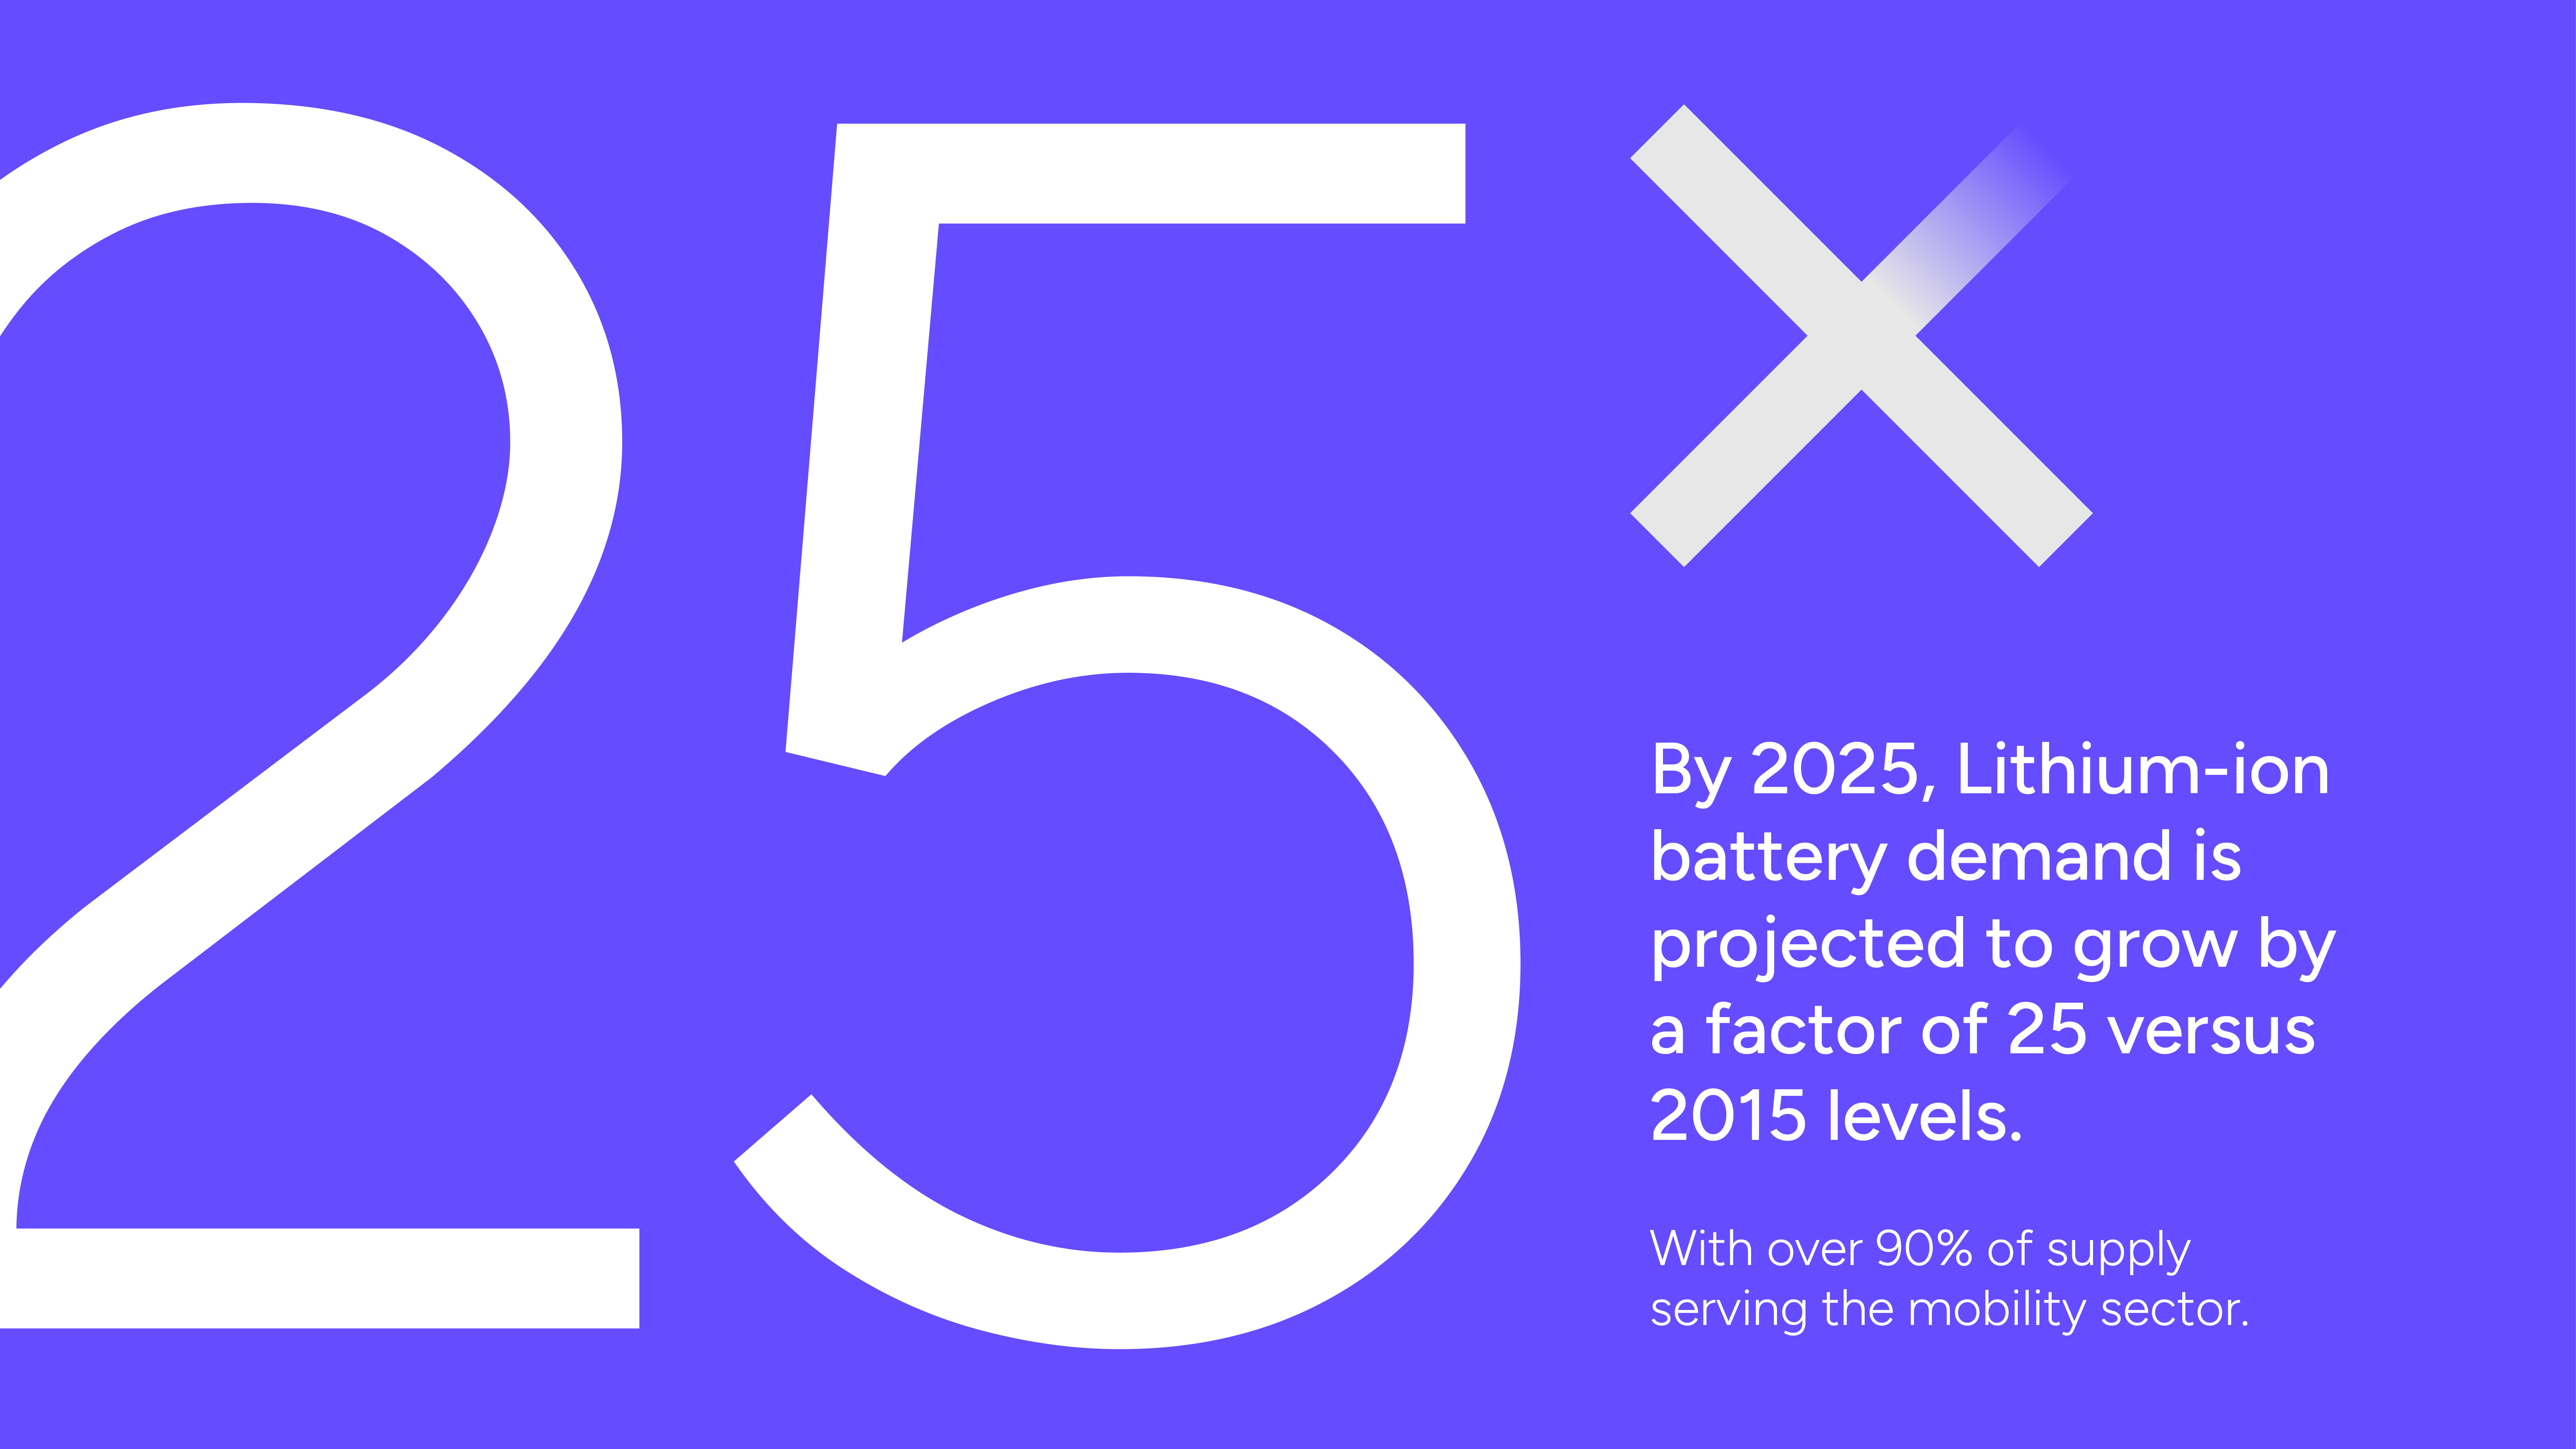 By 2025, Lithium-ion battery demand is going to grow by a factor of 25 versus 2015 levels